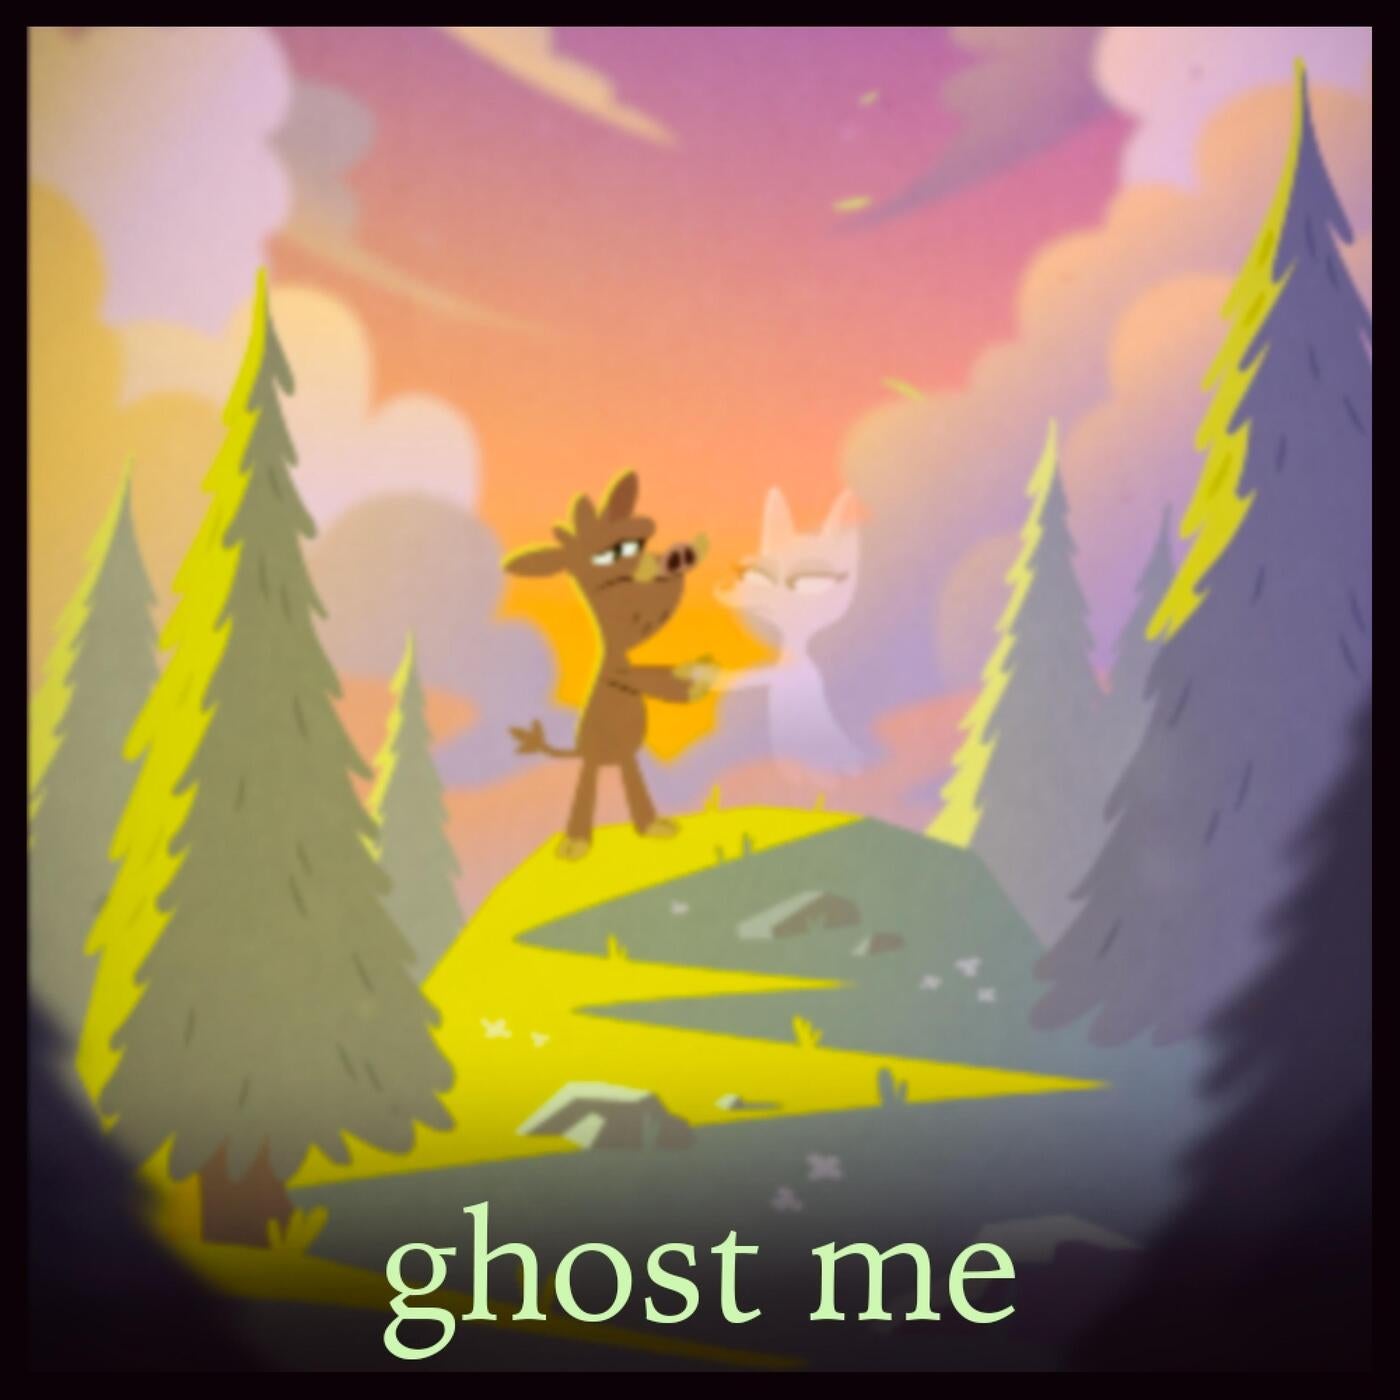 Ghost Me